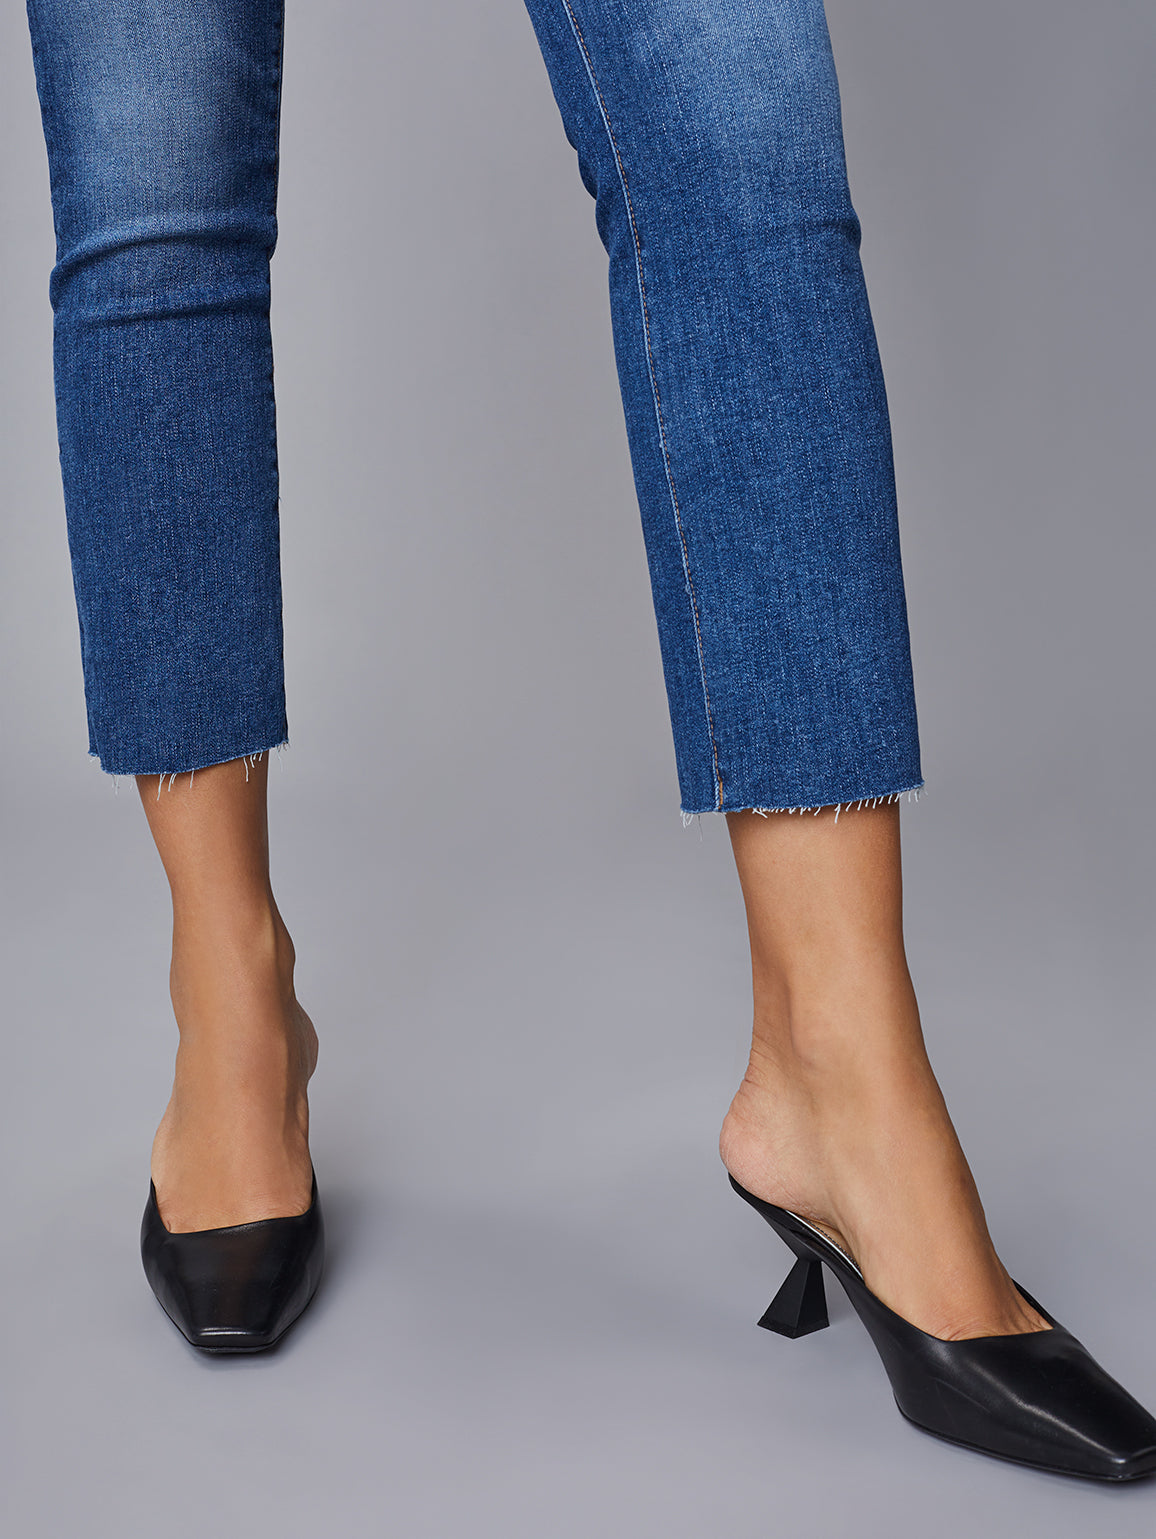 DL1961 Mara mid rise ankle jeans